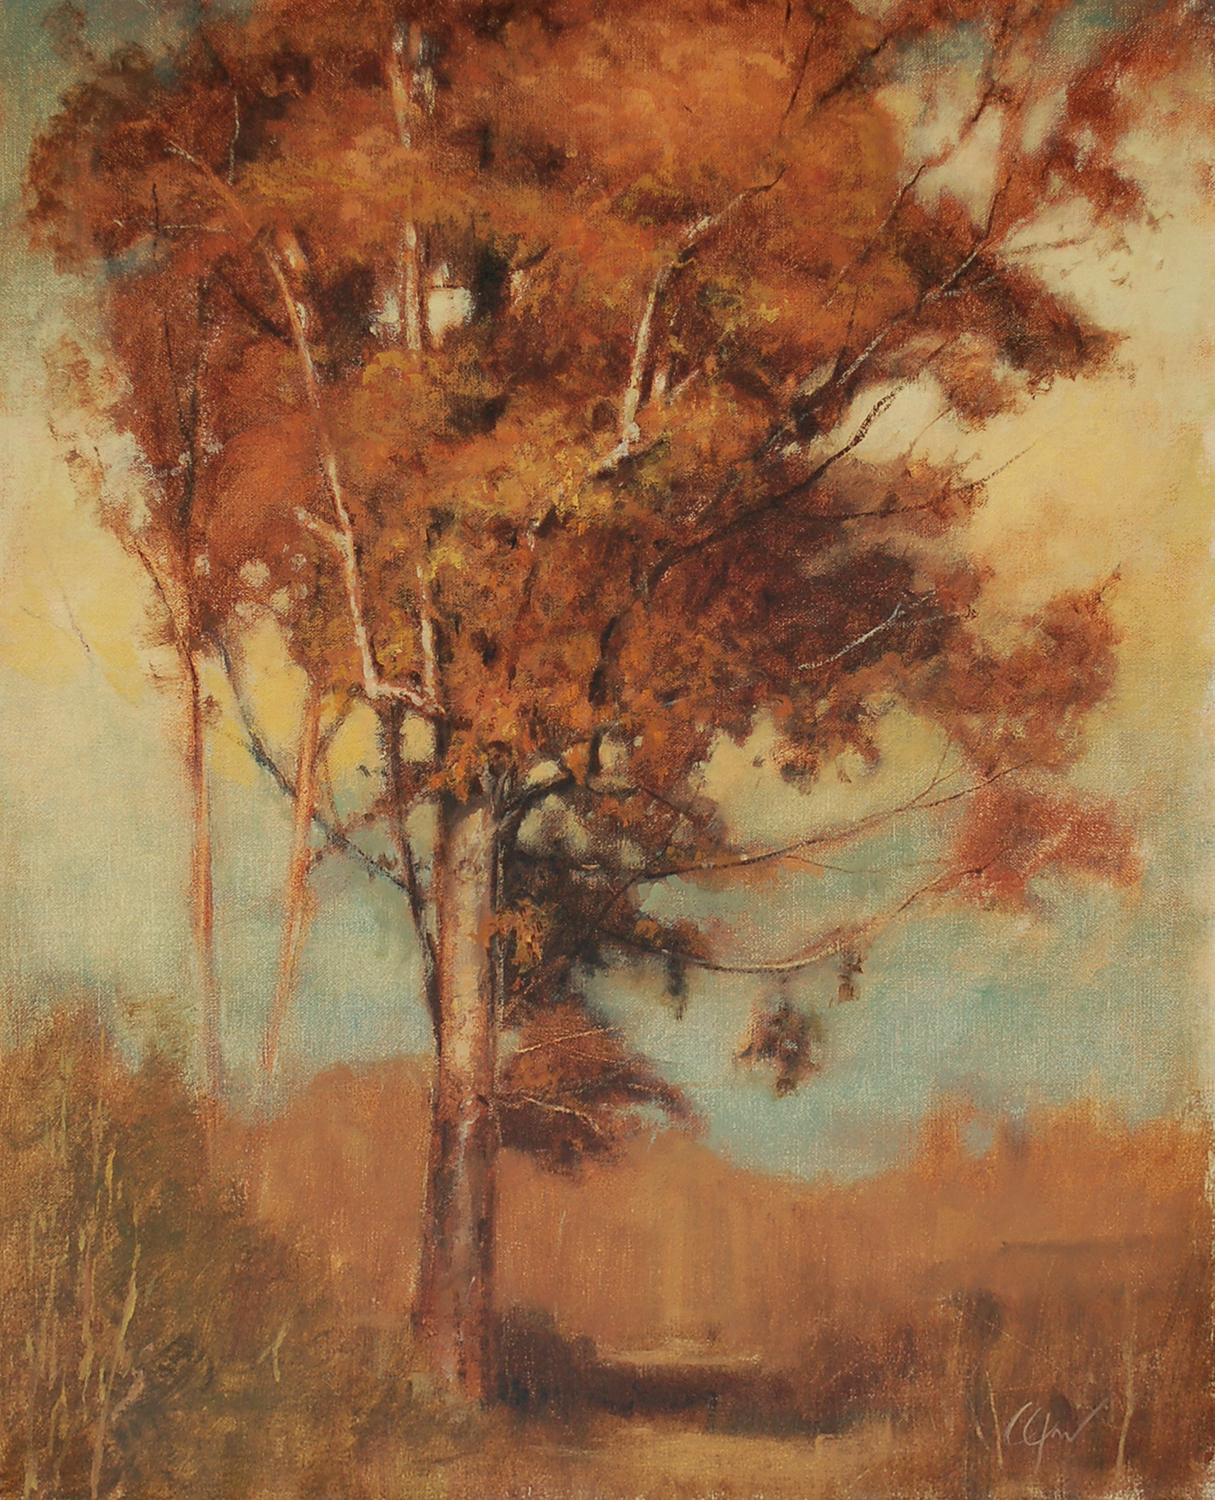 Chris Groves, "Autumn Gesture," 21 x 17 inches, oil on linen